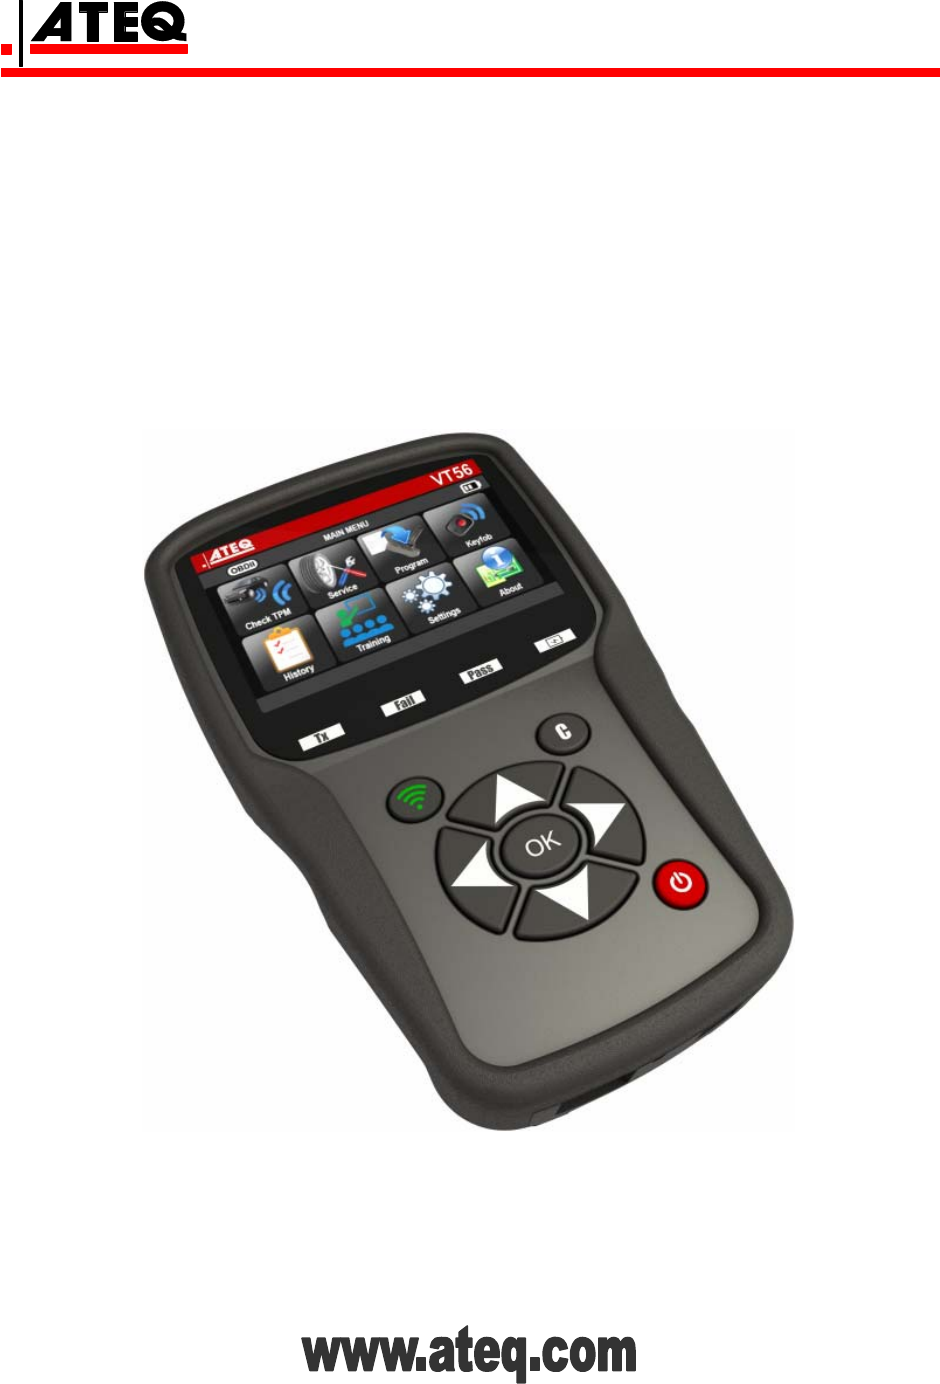 ATEQ VT56 TPMS Reset Tool Annual Subscription Update